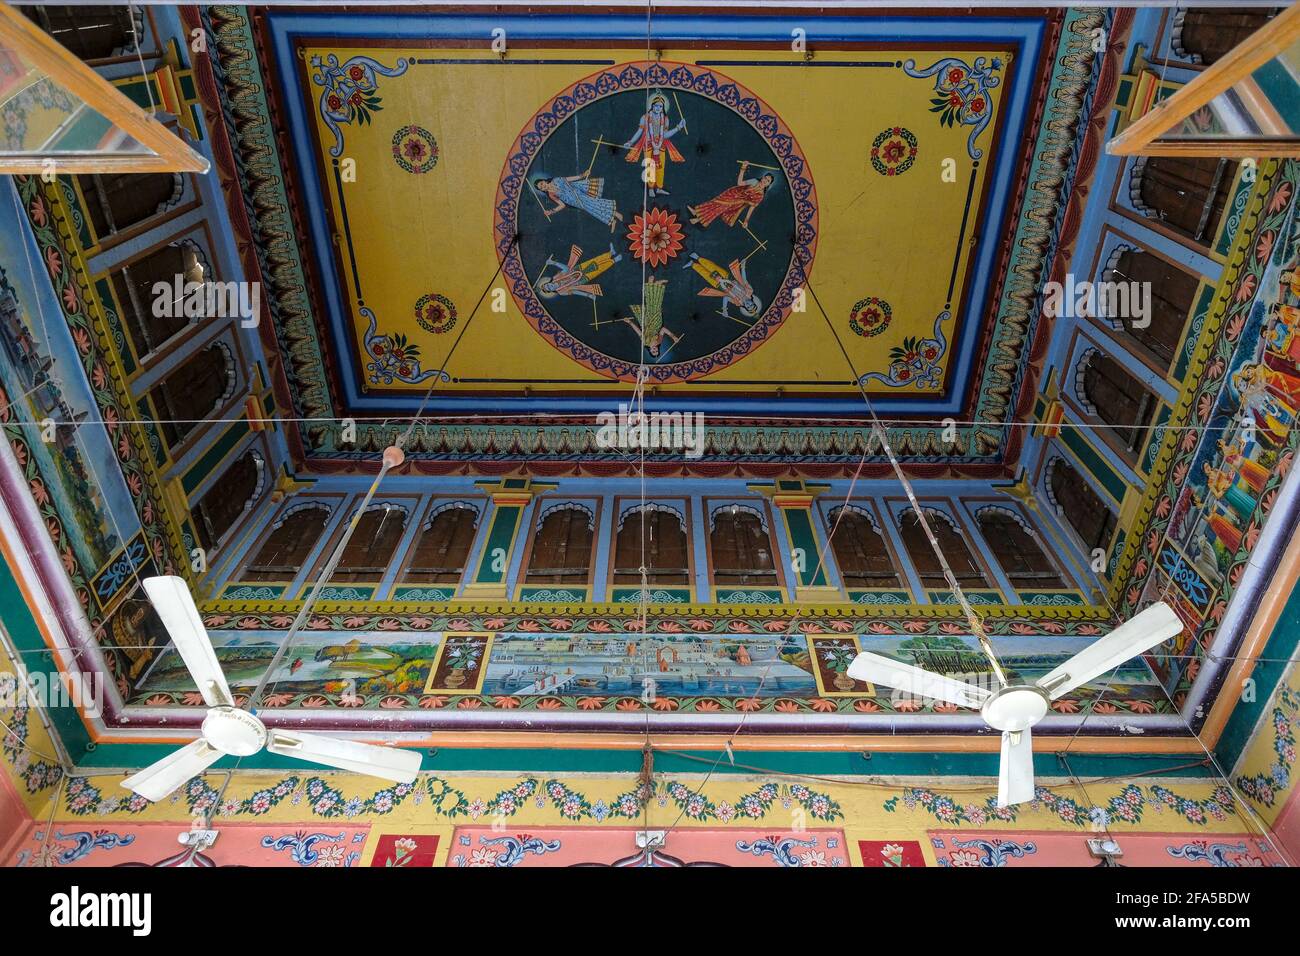 Ujjain, India - March 2021: Detail of the interior of the Gopal Temple in Ujjain on March 24, 2021 in Madhya Pradesh, India. Stock Photo